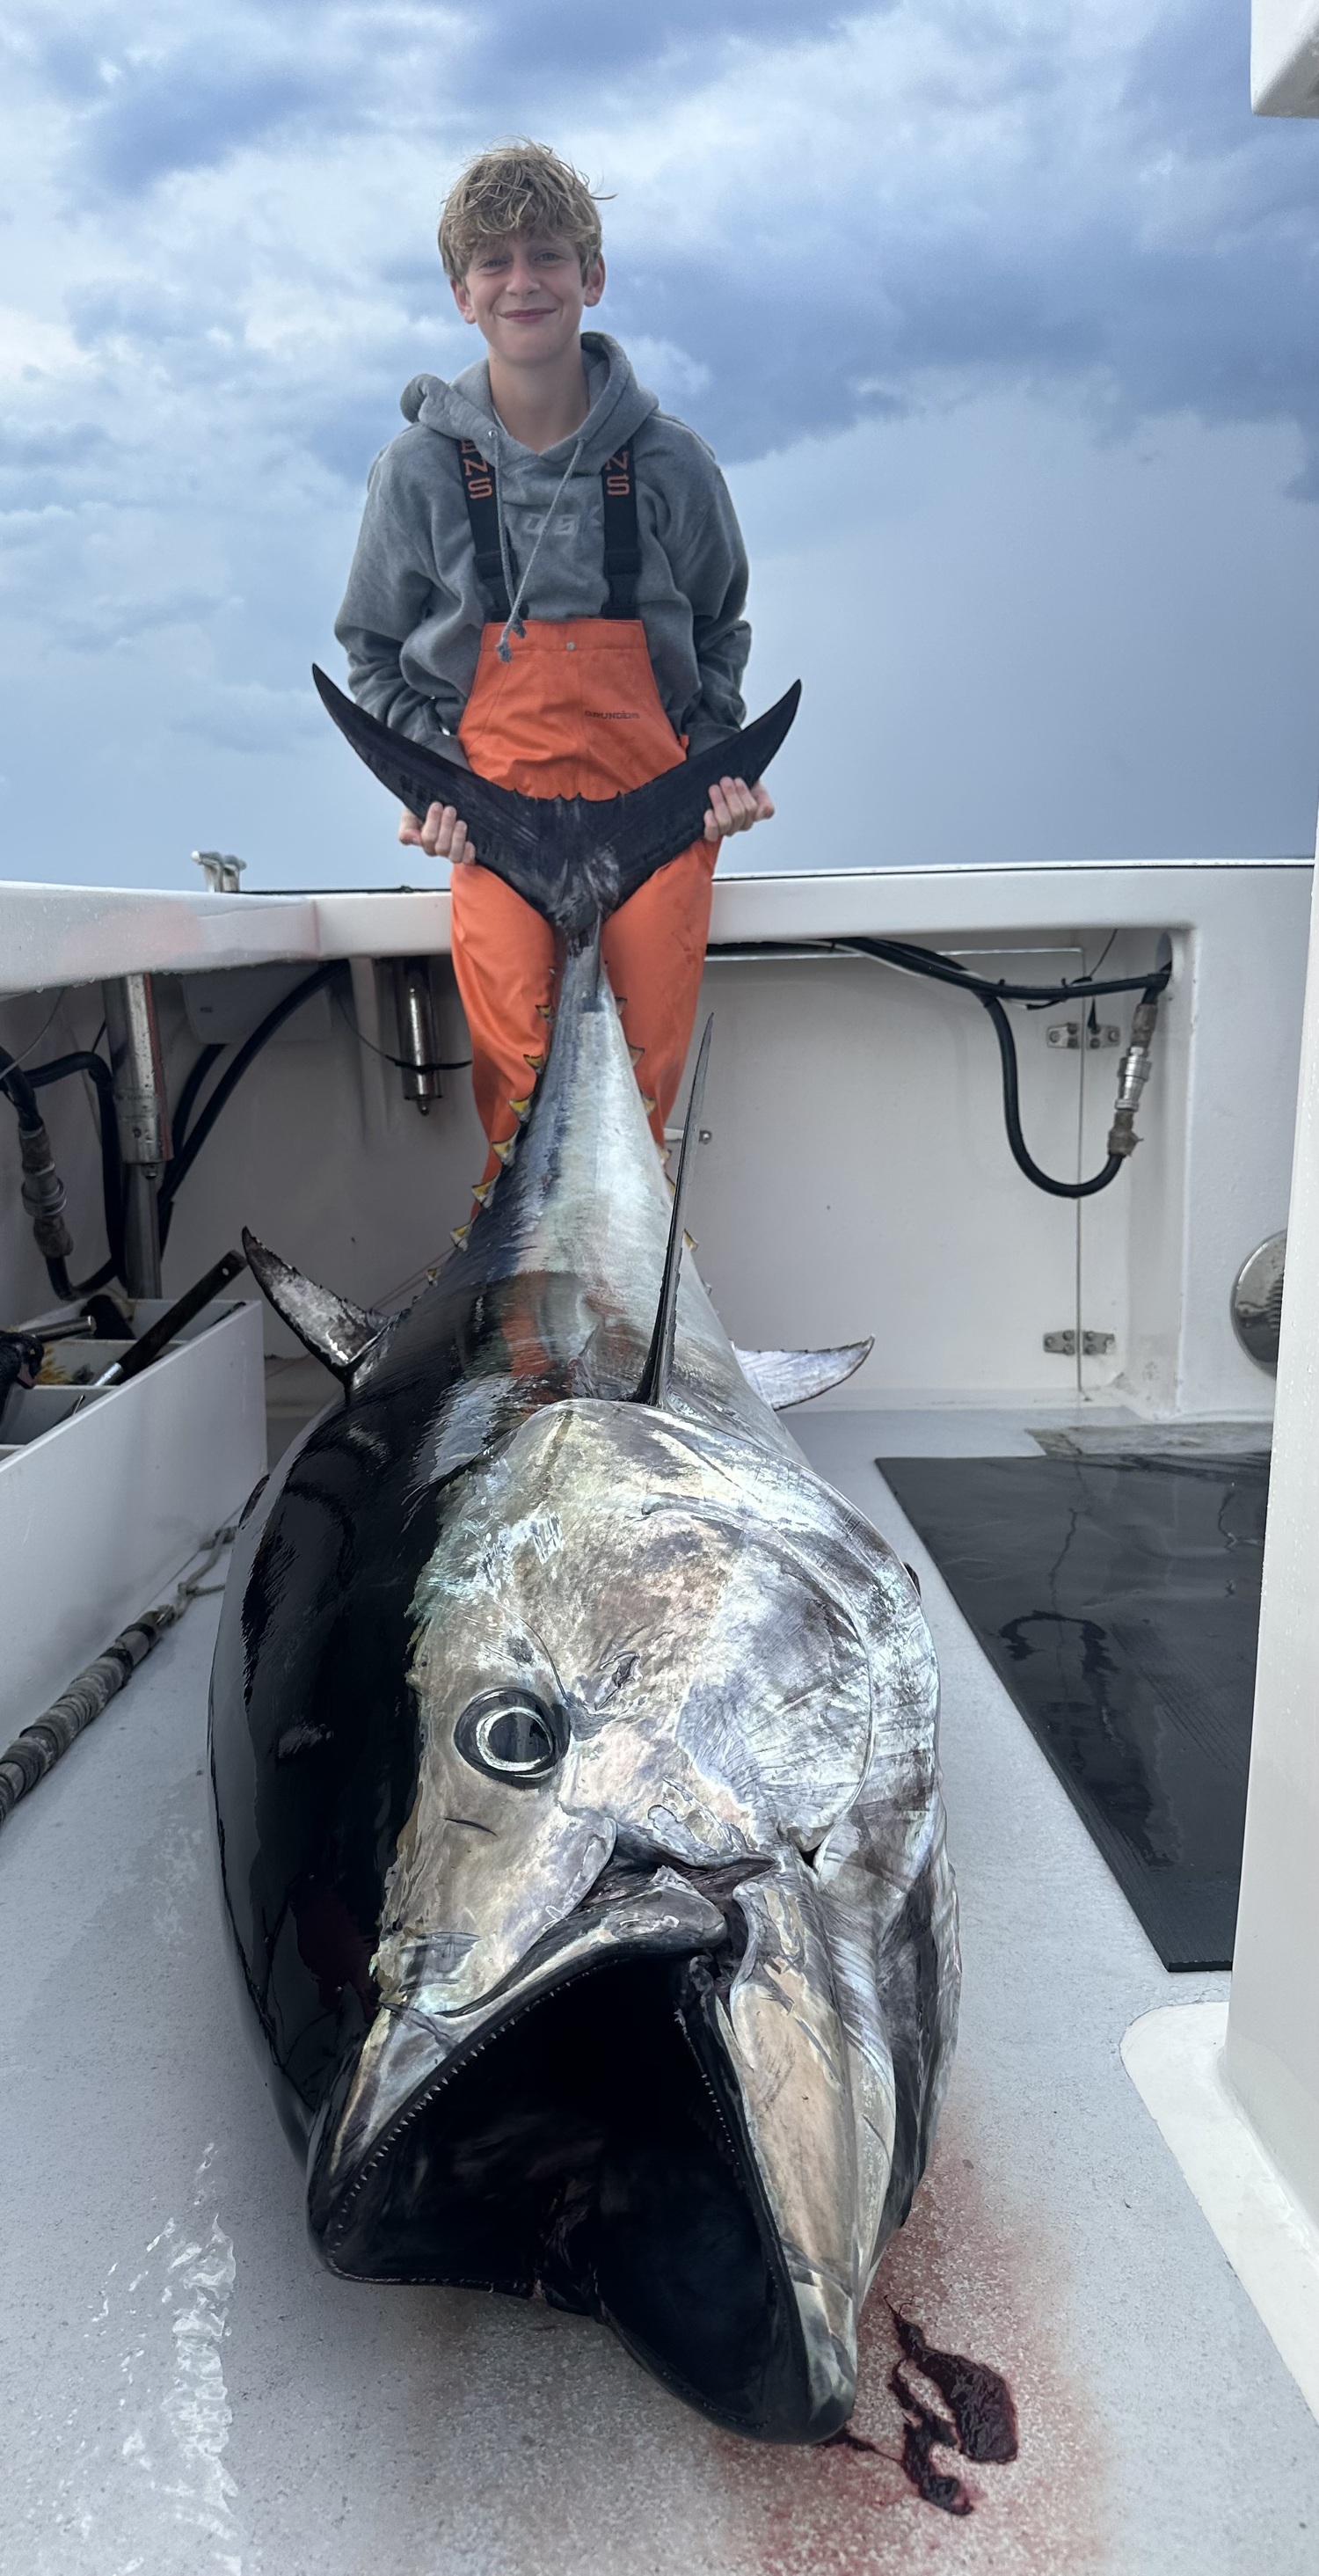 Braydan Fromm with a giant bluefin tuna caught while fishing with his dad aboard the Flying Dutchman.